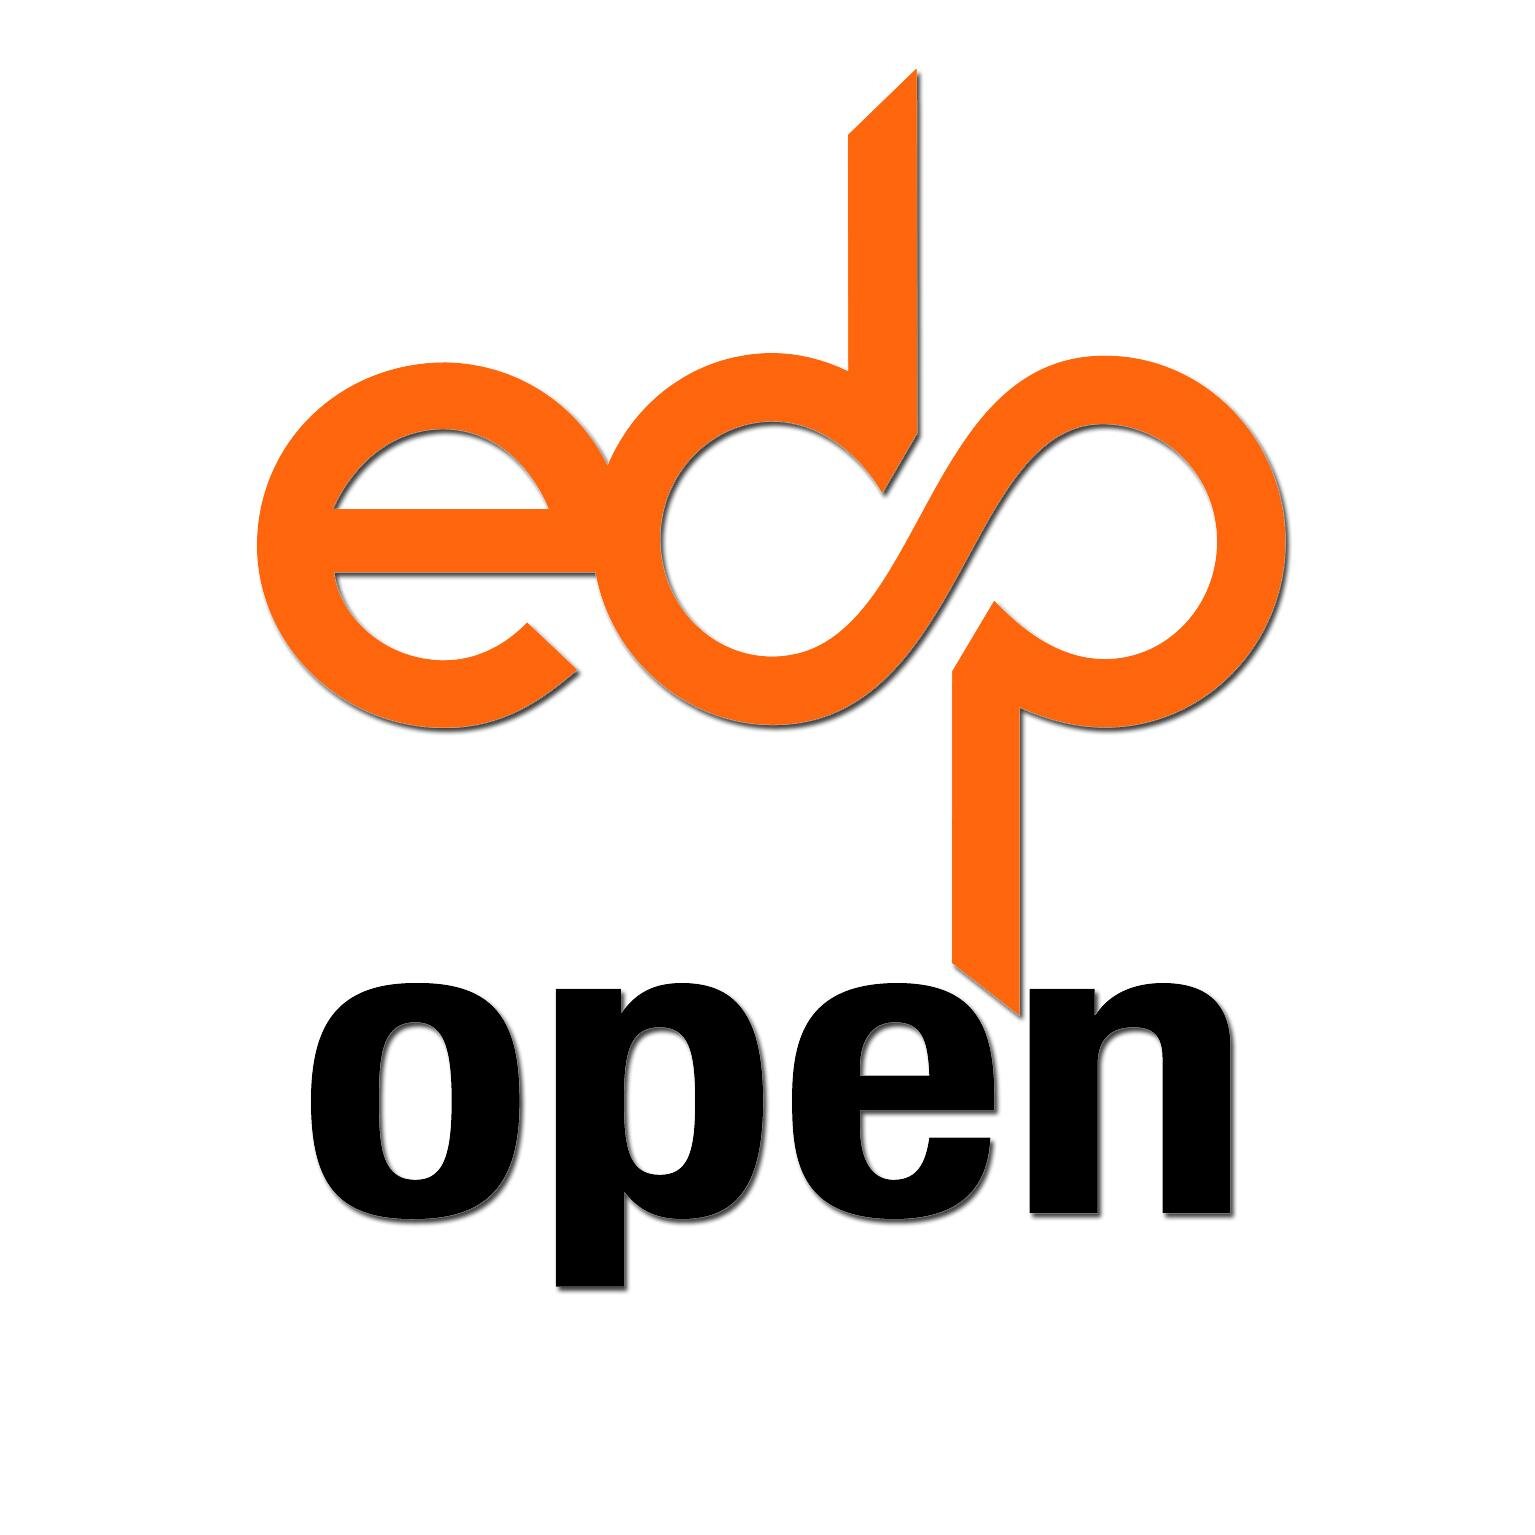 Connect with the global #openaccess scientific community!
Discover the Open Access publishing arm of EDP Sciences